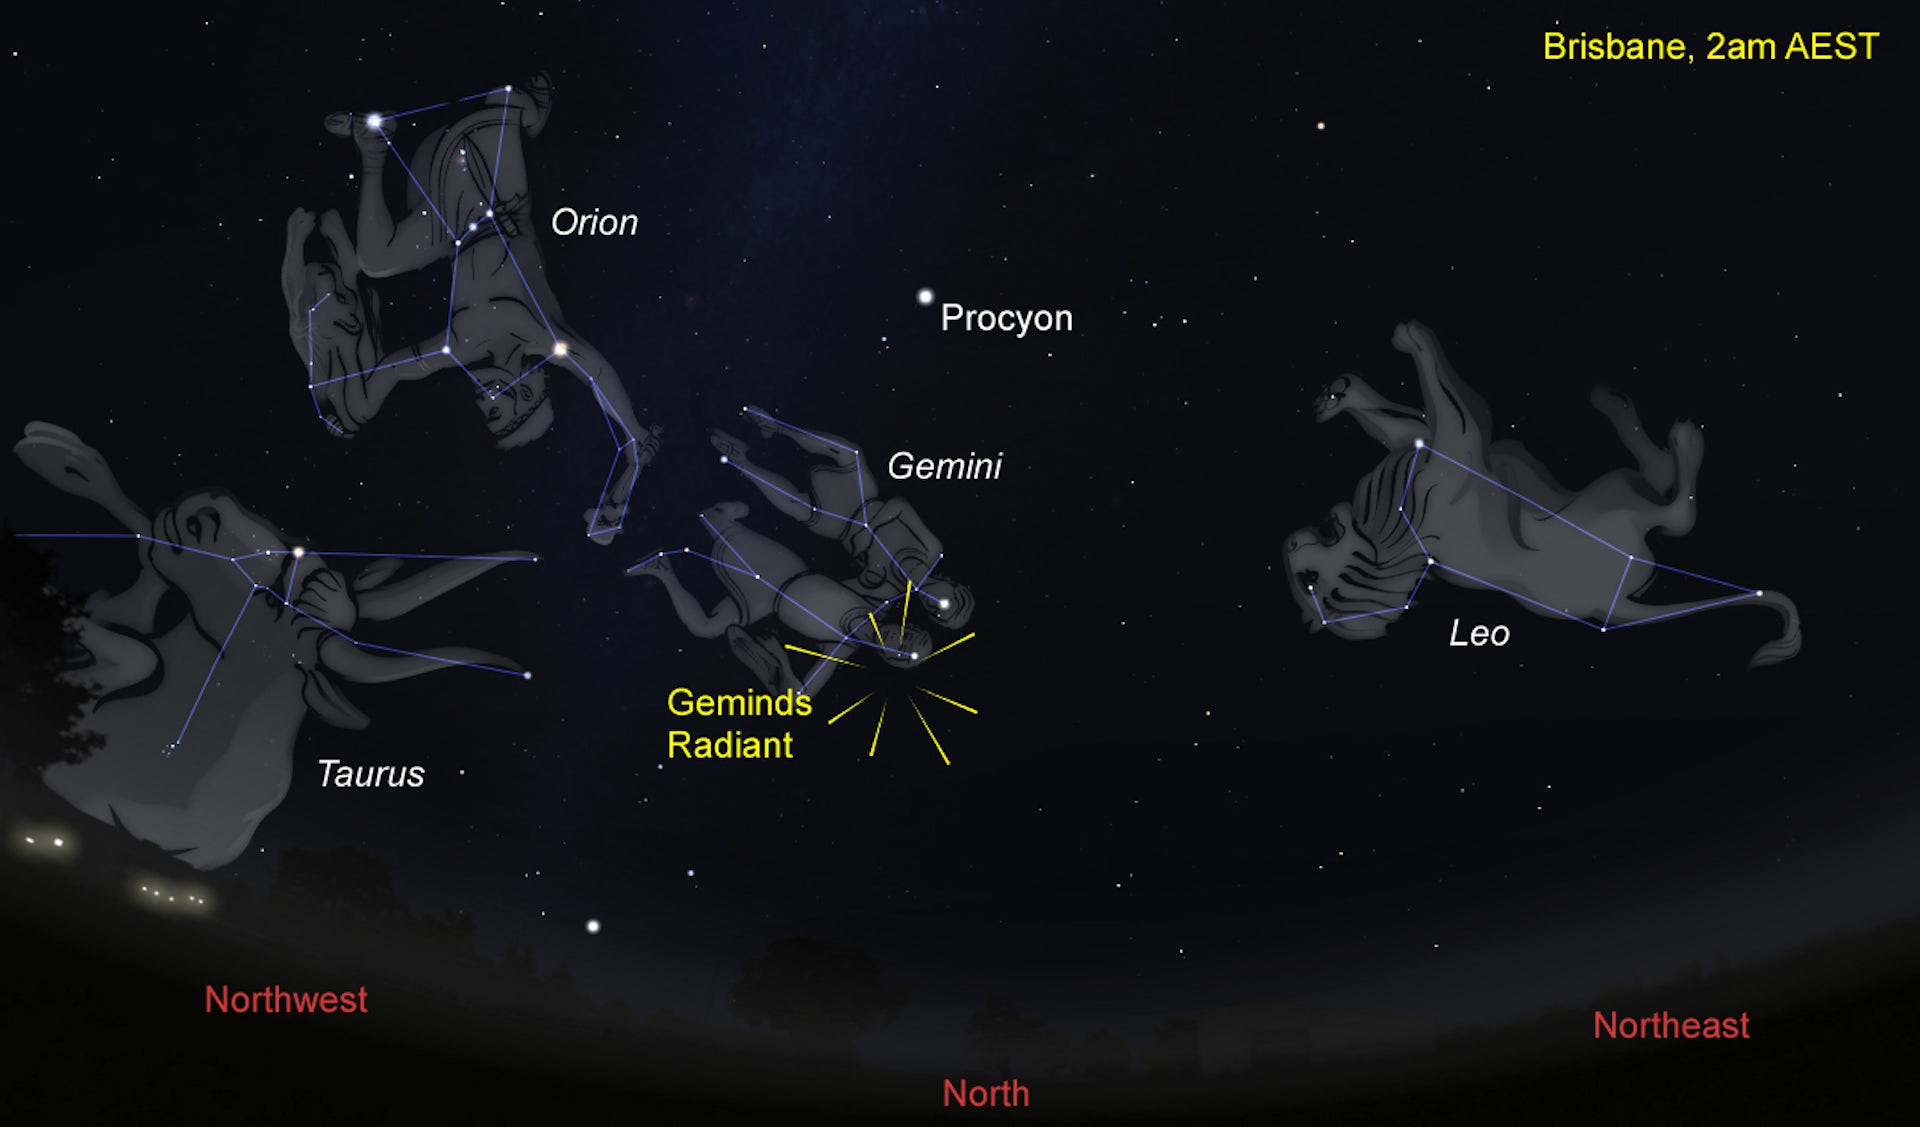 Get Ready for the Geminids: A Spectacular Meteor Shower of the Year